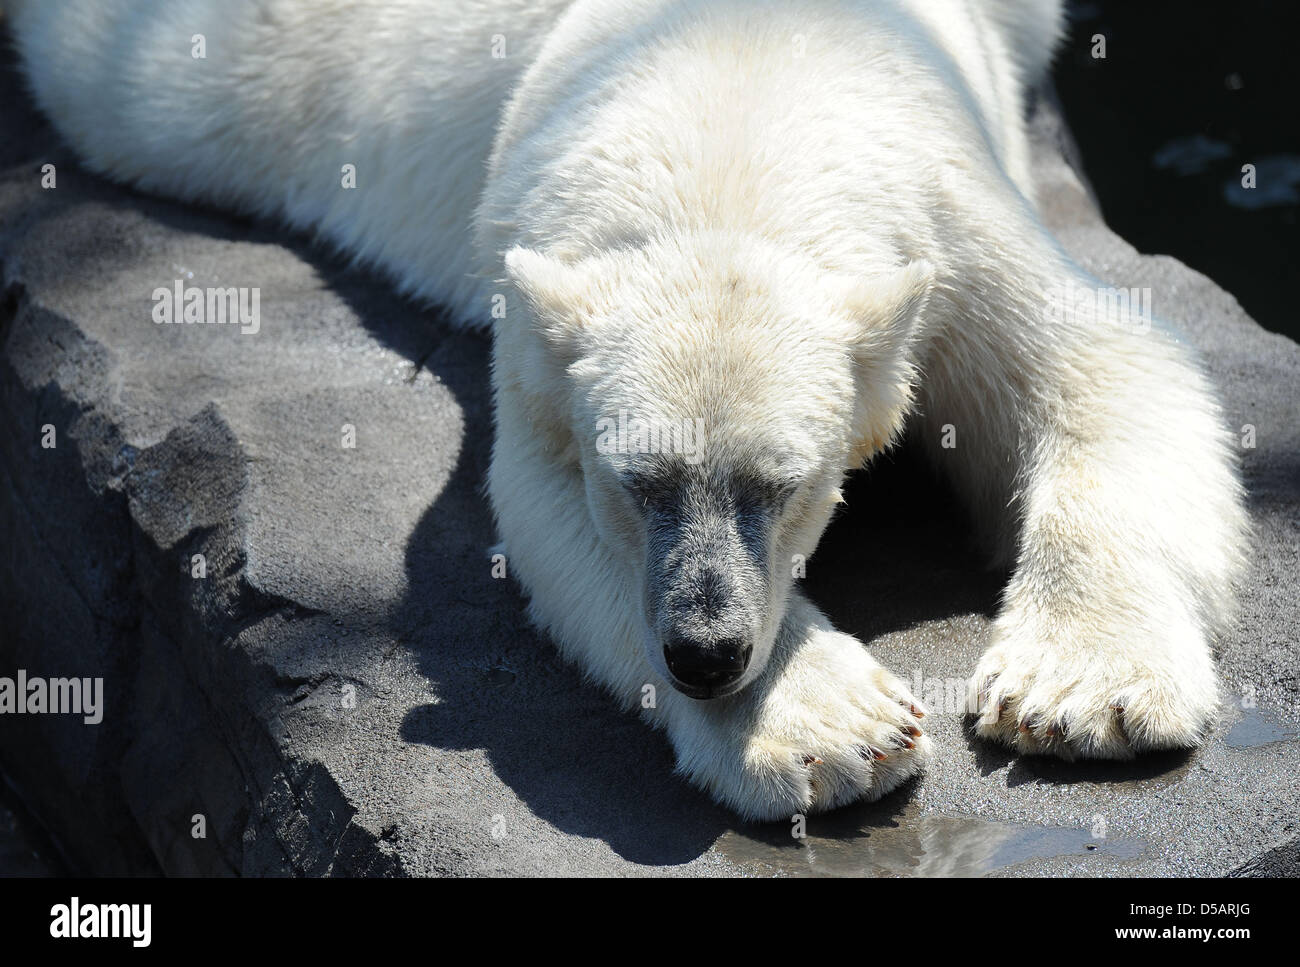 Polar bear sprinter enjoys the sun and temperatures of about 30 degrees Celsius in the Hanover Zoo in Germany, 09 July 2010. Meteorologists predict continuting hot summer weather with temperatures of up to 38 degrees Celsius. Photo: Peter Steffen Stock Photo